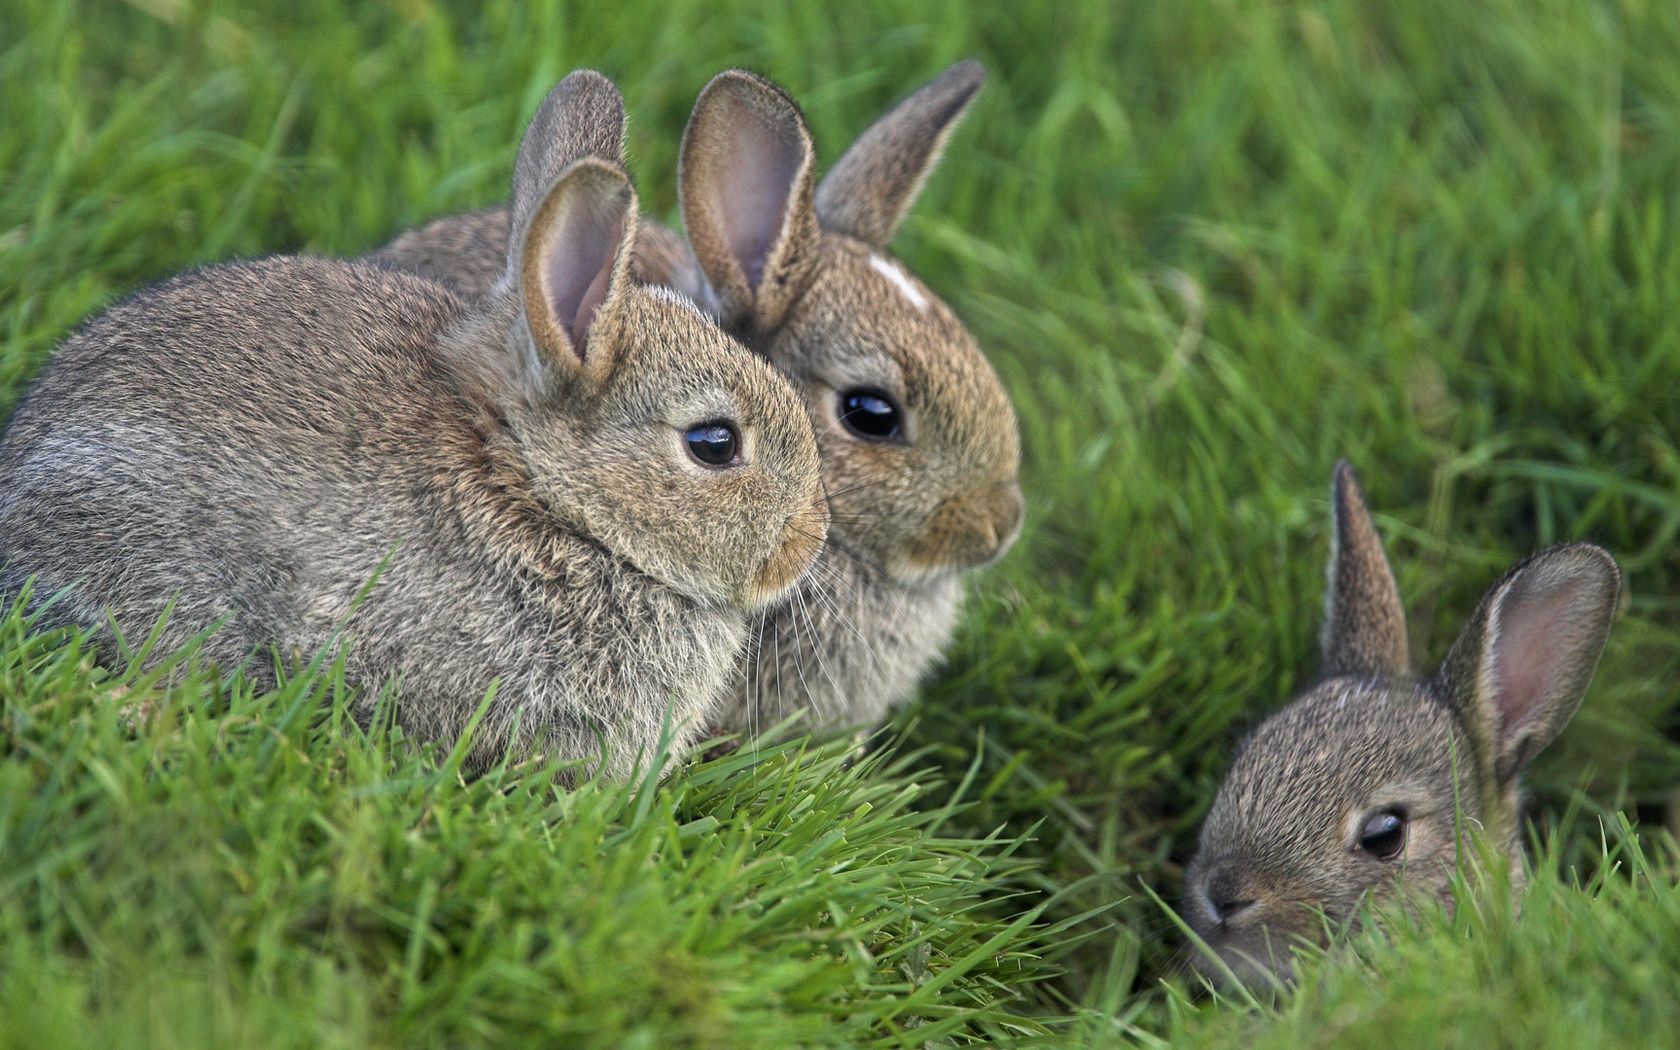 rabbits, animals, sit, grass, hide, fear, disguise, camouflage, three